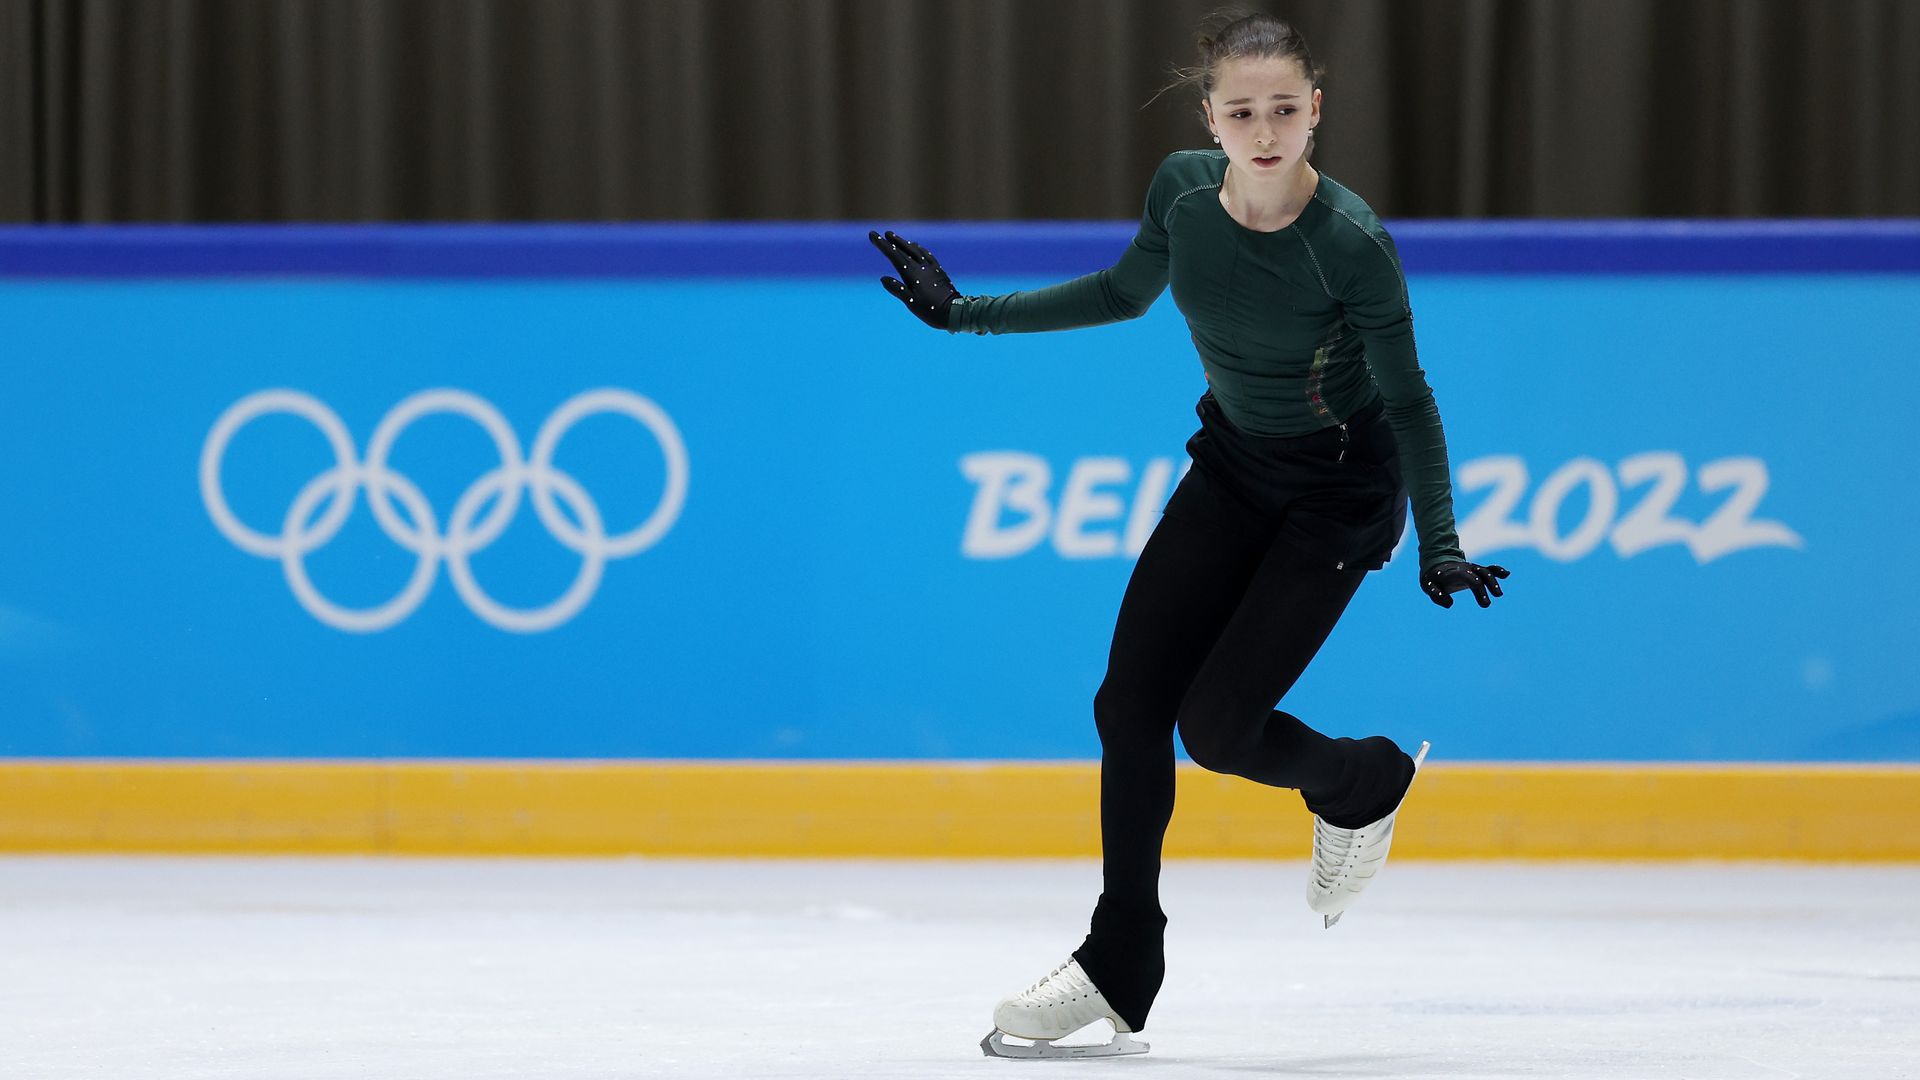 Kamila Valieva of Team ROC skates during a training session on day ten of the Beijing 2022 Winter Olympic Games at Capital Indoor Stadium practice rink on February 14